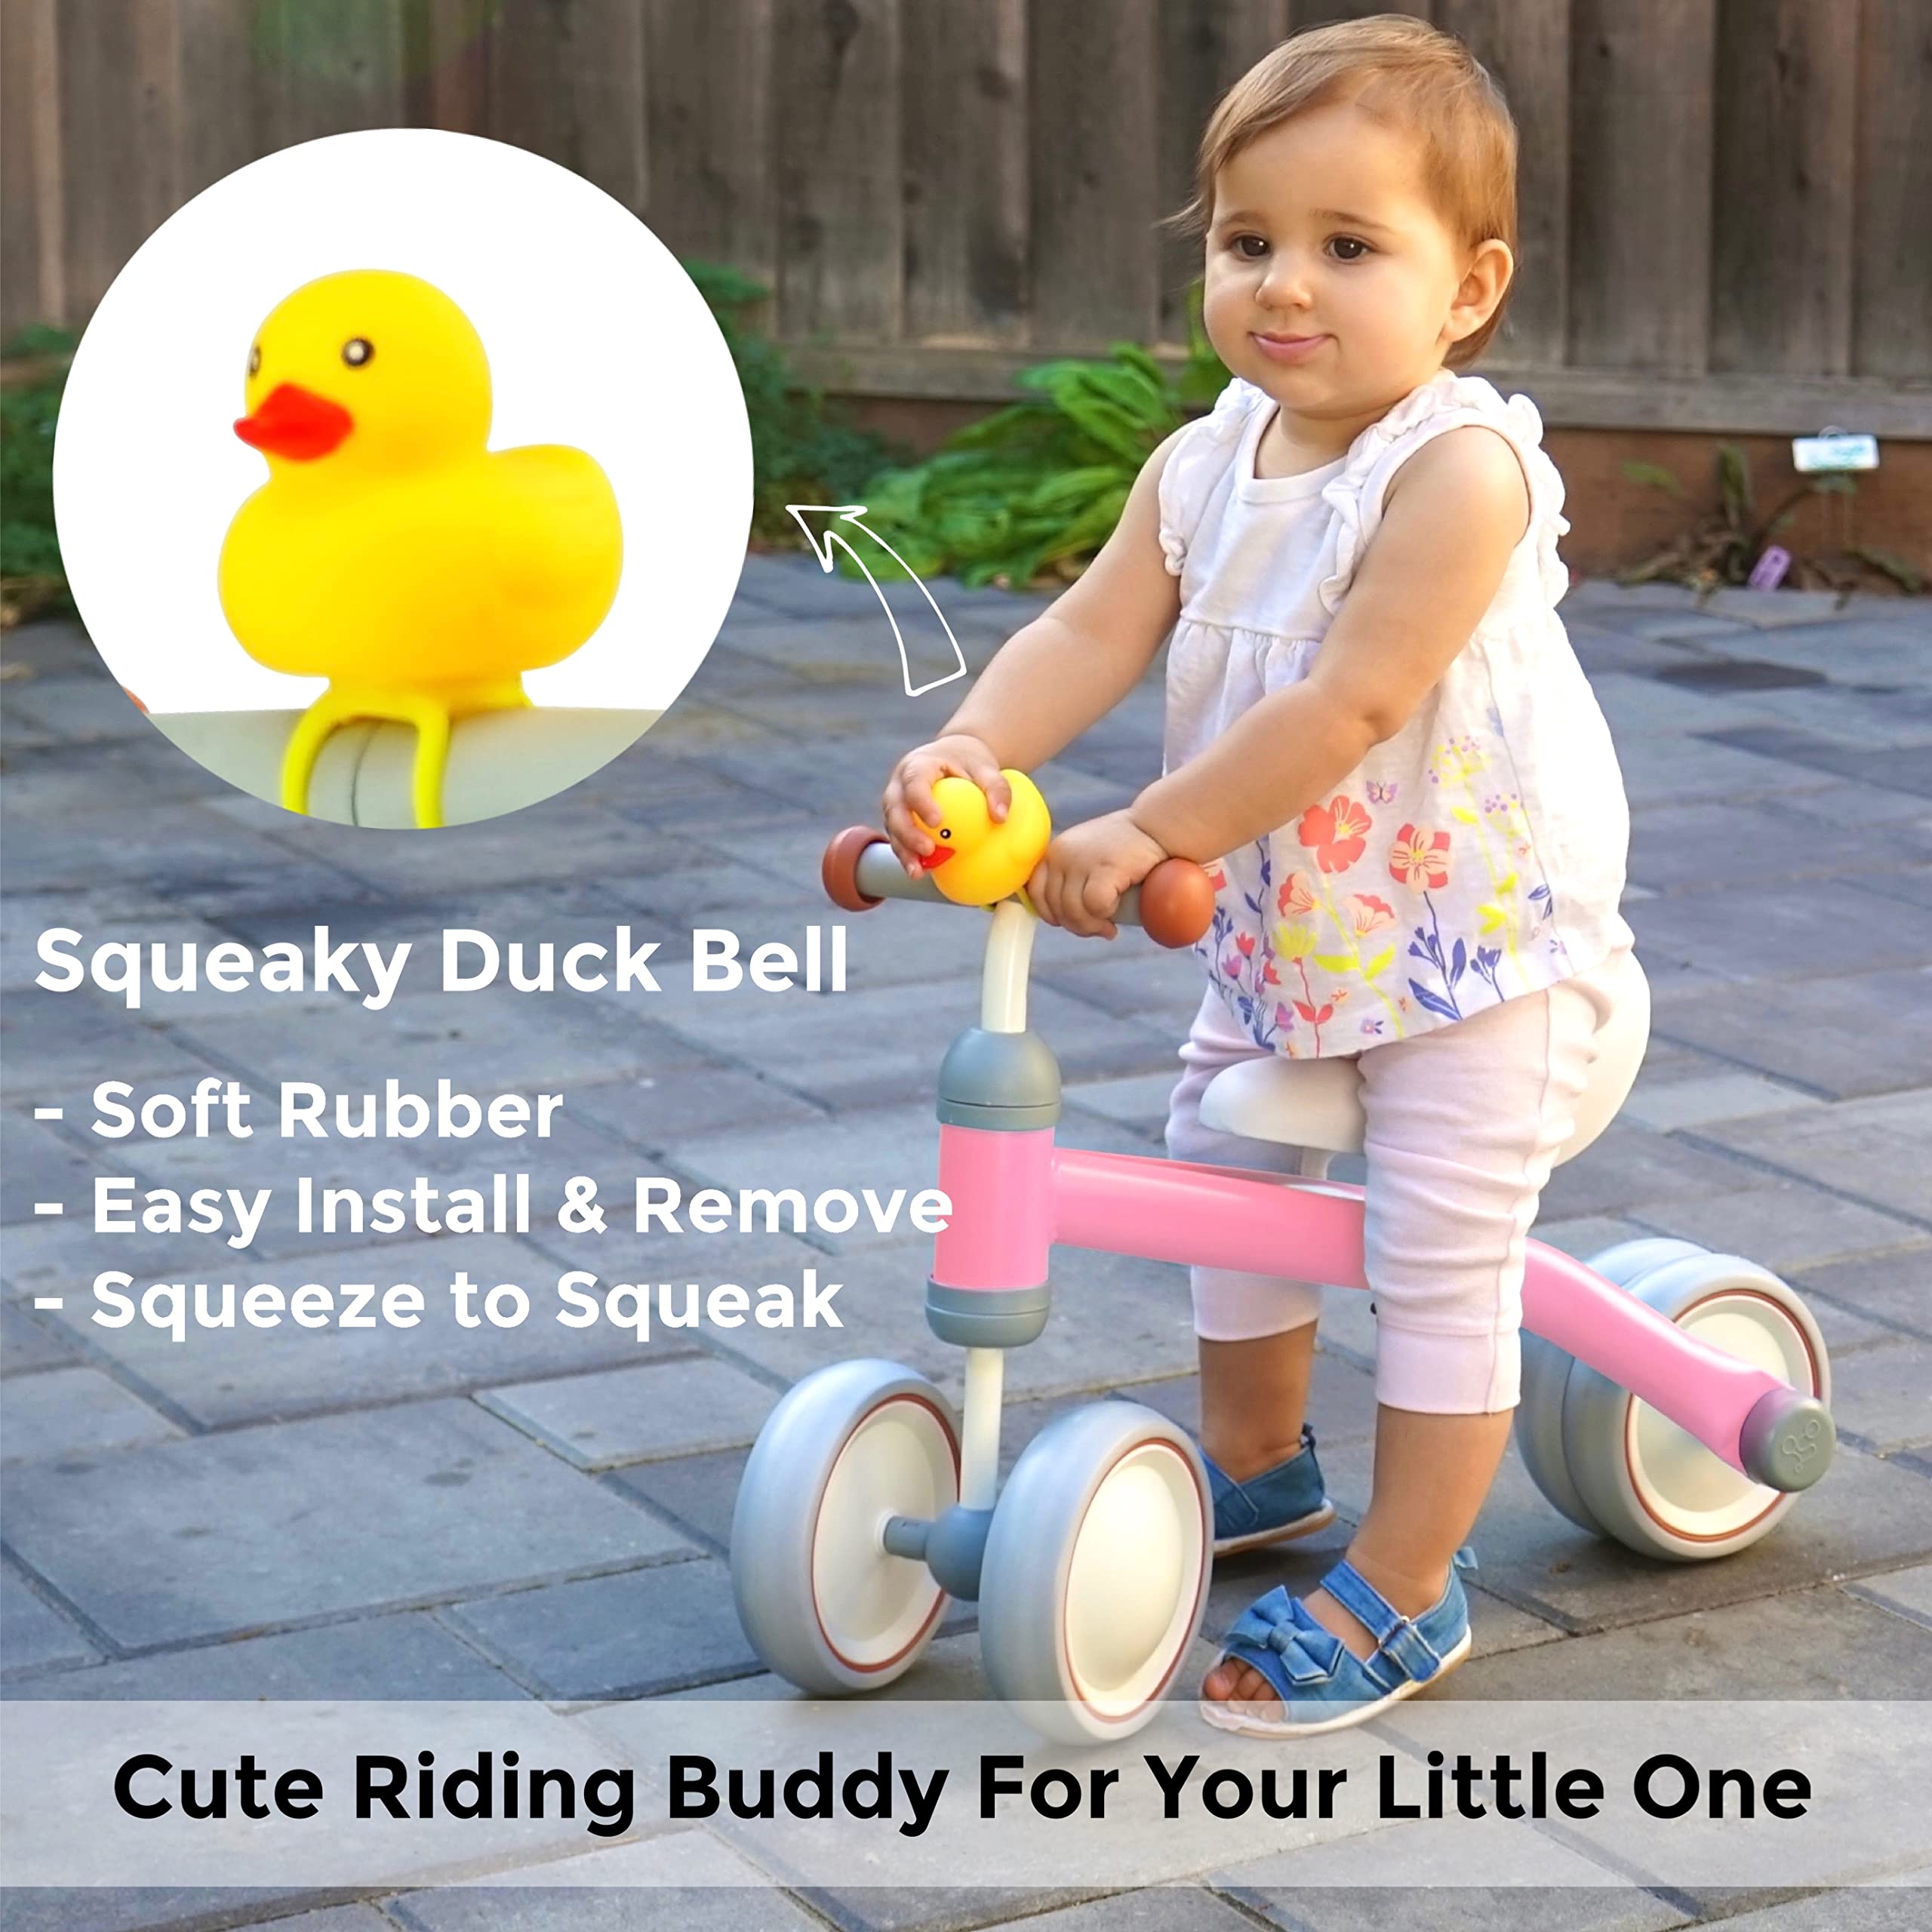 KRIDDO Baby Balance Bike for 1-2 Year Old Boy and Girl Gifts, Toddler Bike with Duck Bell for One Year Old First Birthday Gifts Baby Toys 12 Months to 3 Year Old, Pink